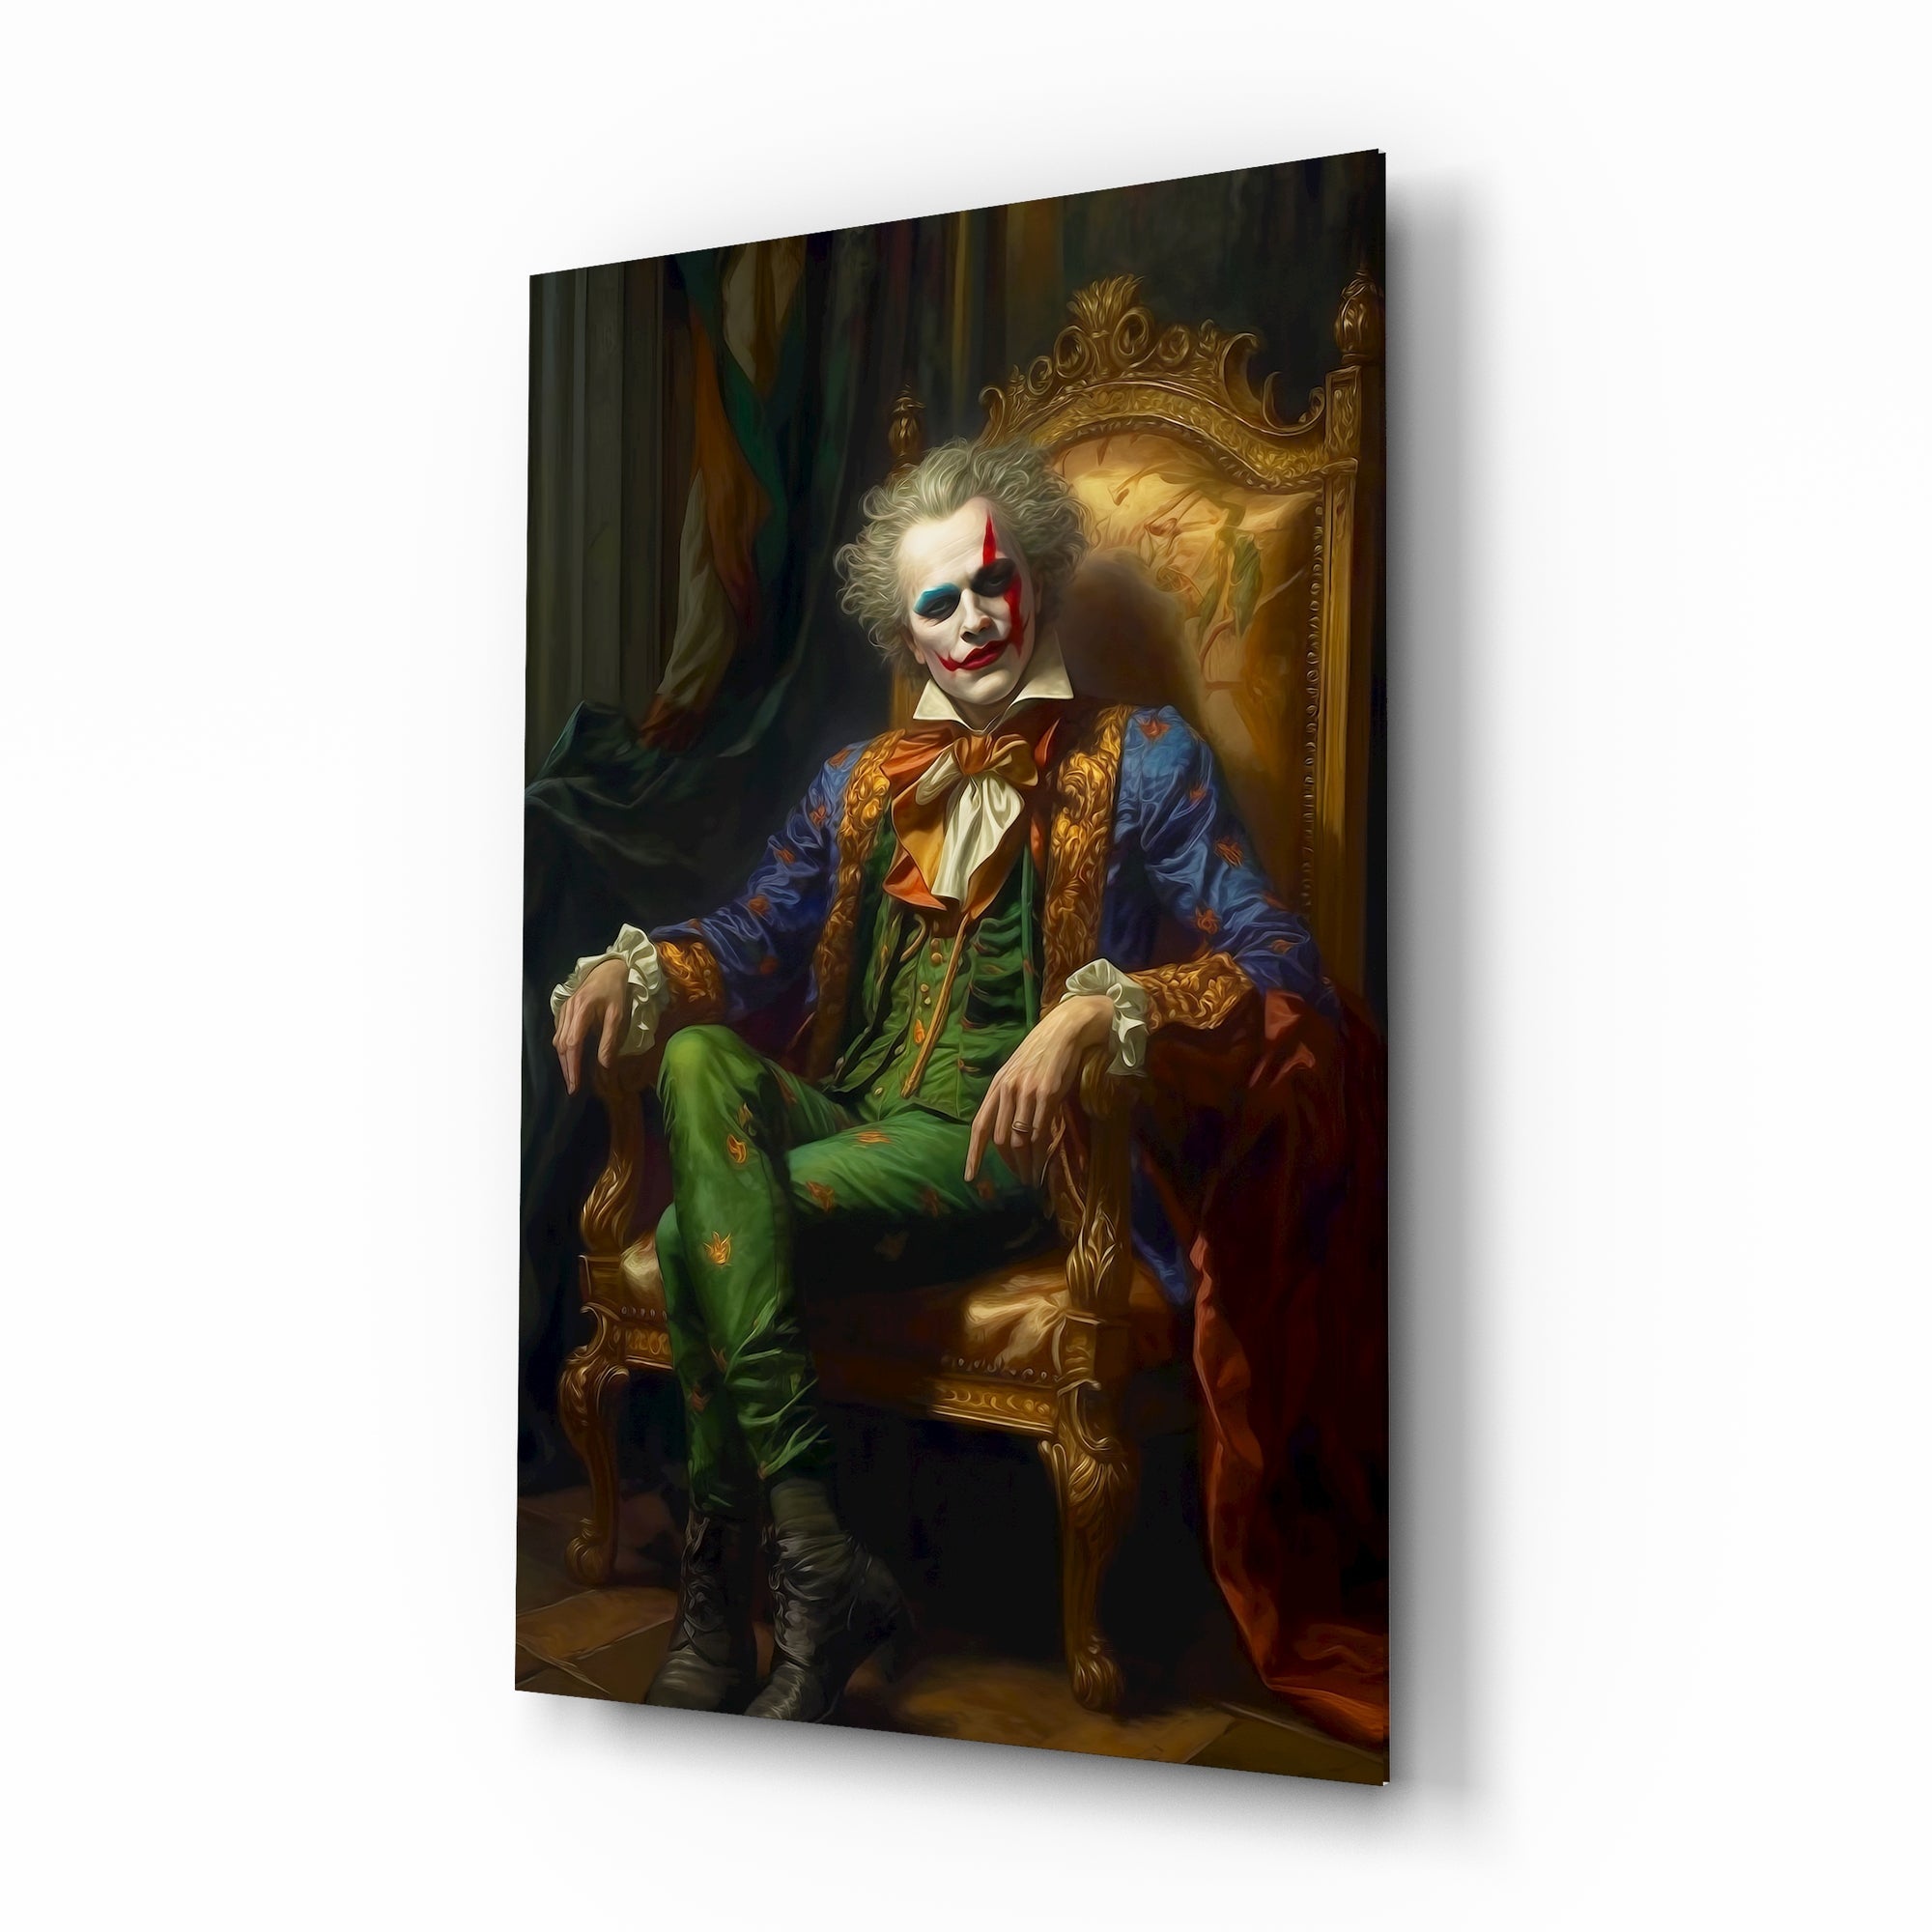 Clown and the Throne Glass Wall Art || Designer's Collection